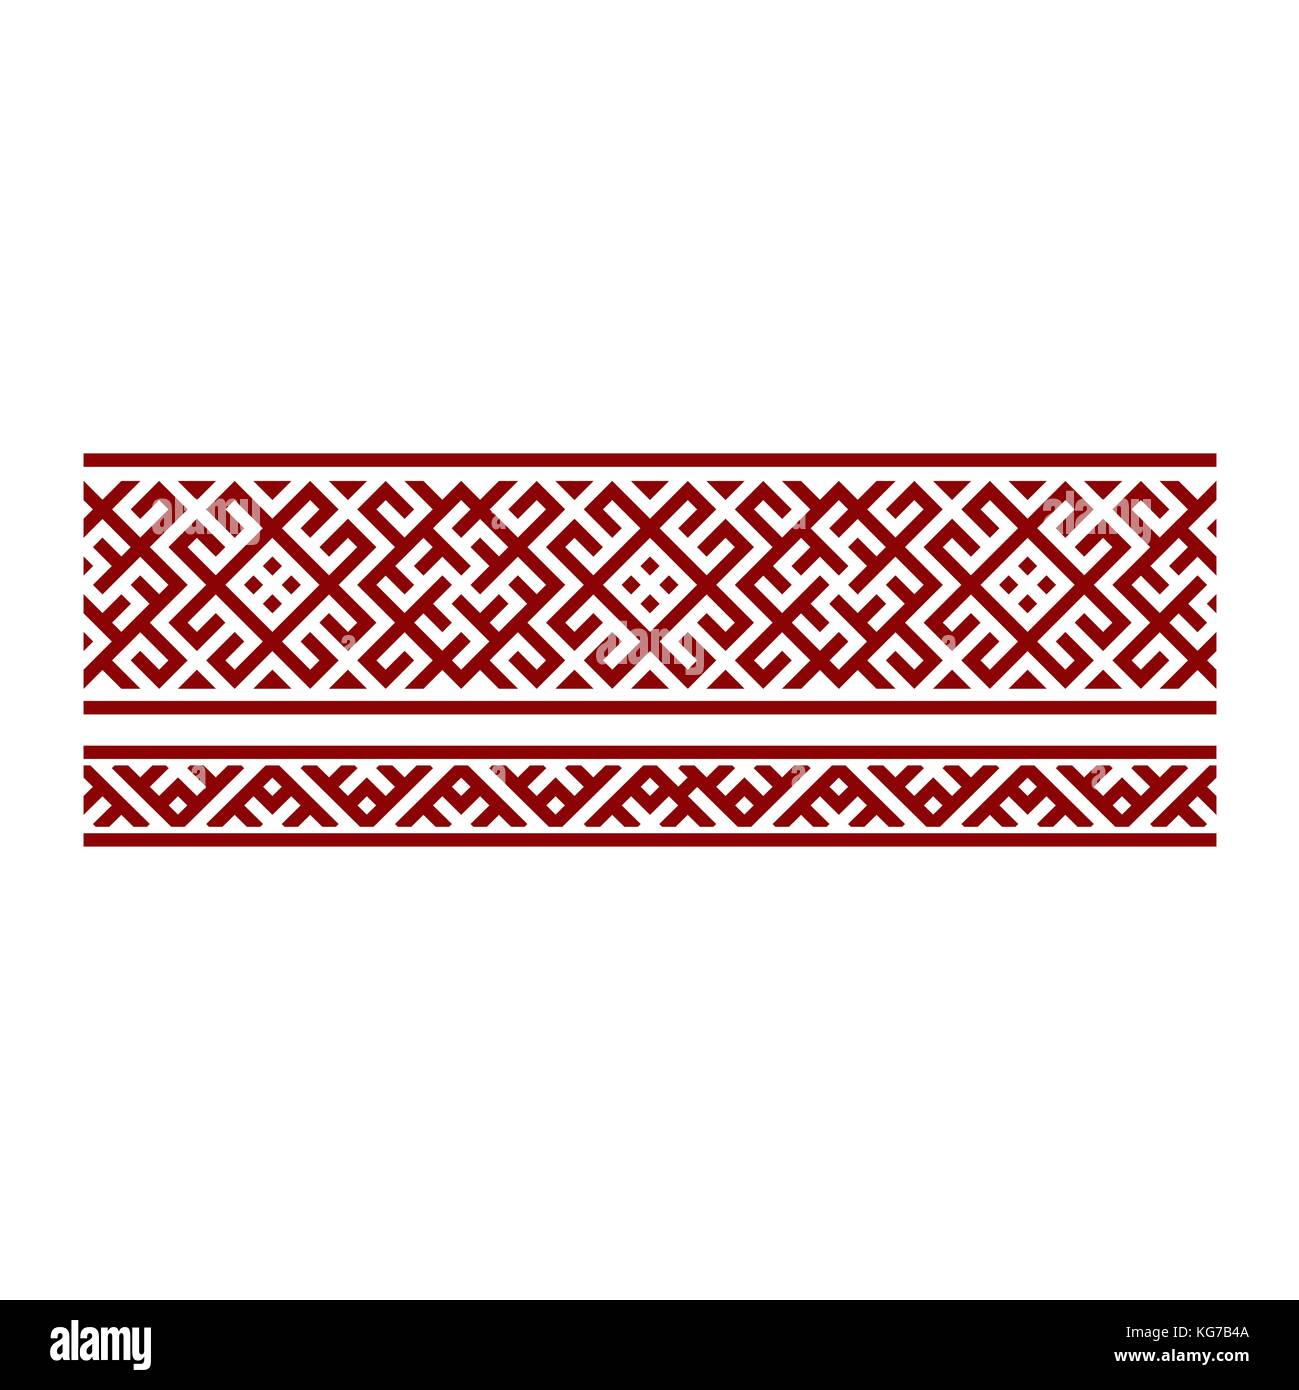 Traditional embroidery. Vector illustration of ethnic seamless ornamental geometric patterns for your design Stock Vector